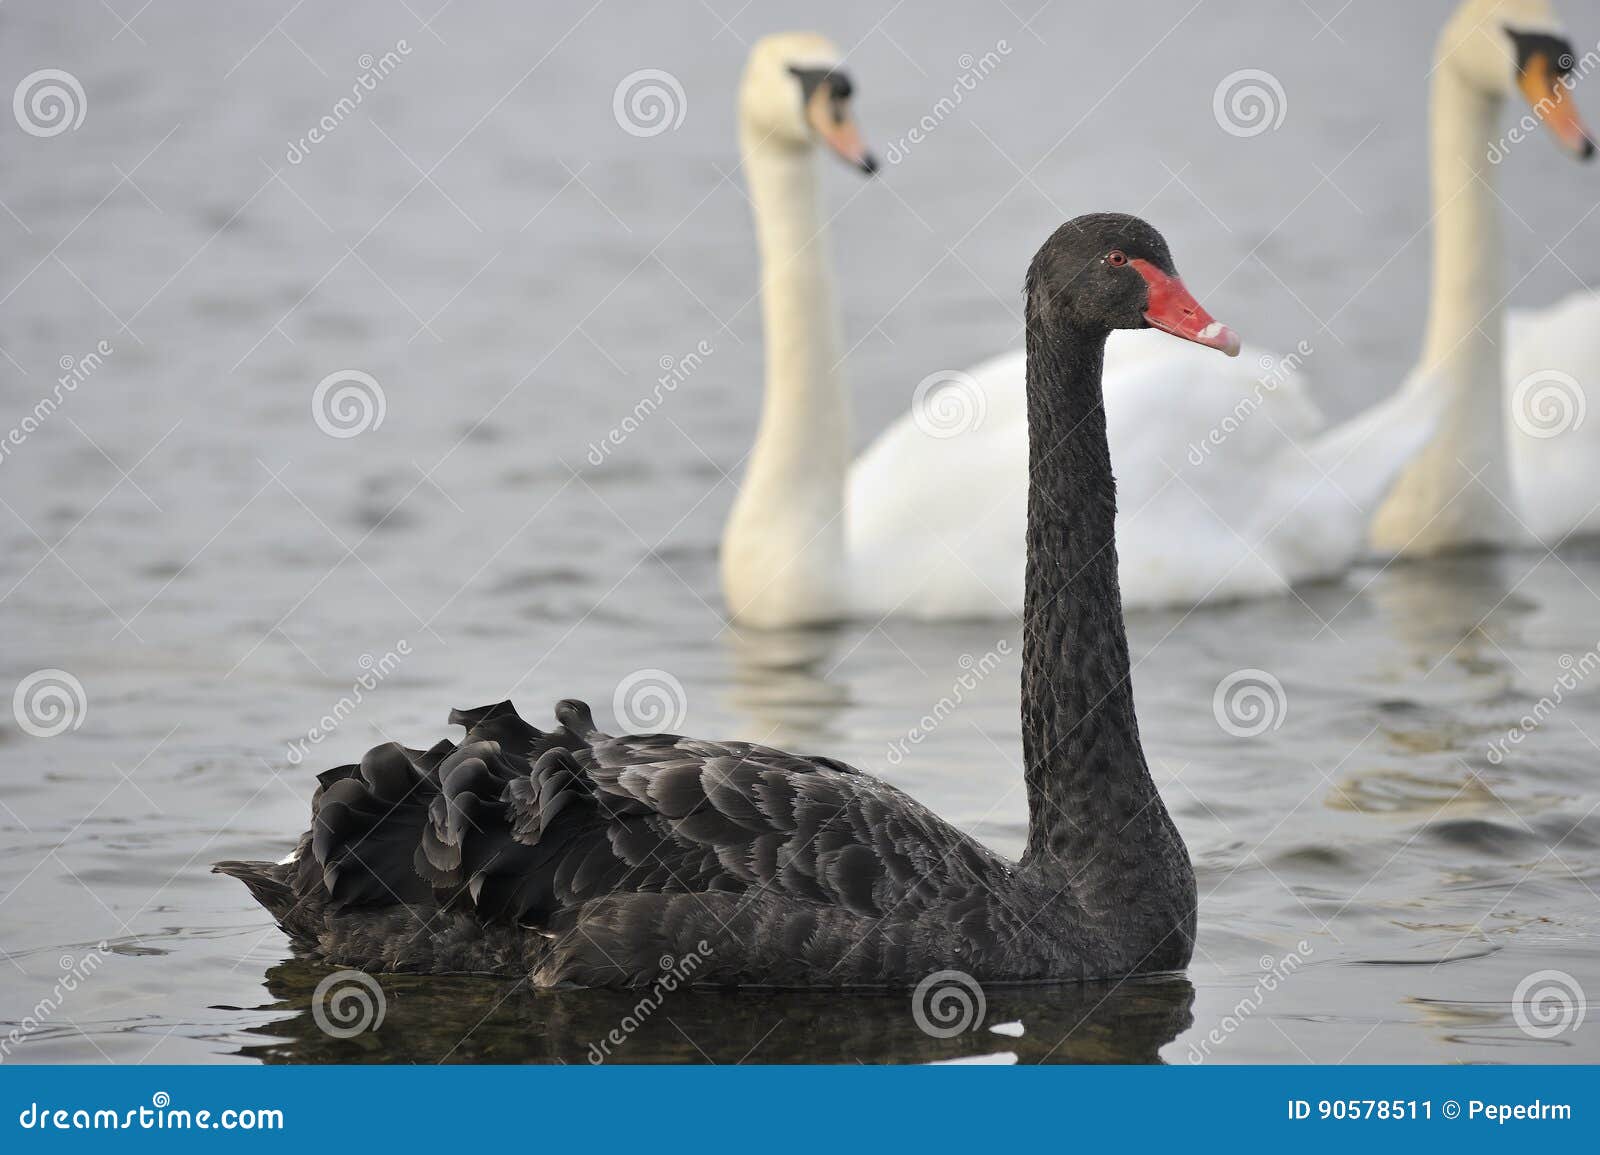 22,344 White Swan - Free & Royalty-Free Stock Photos from Dreamstime